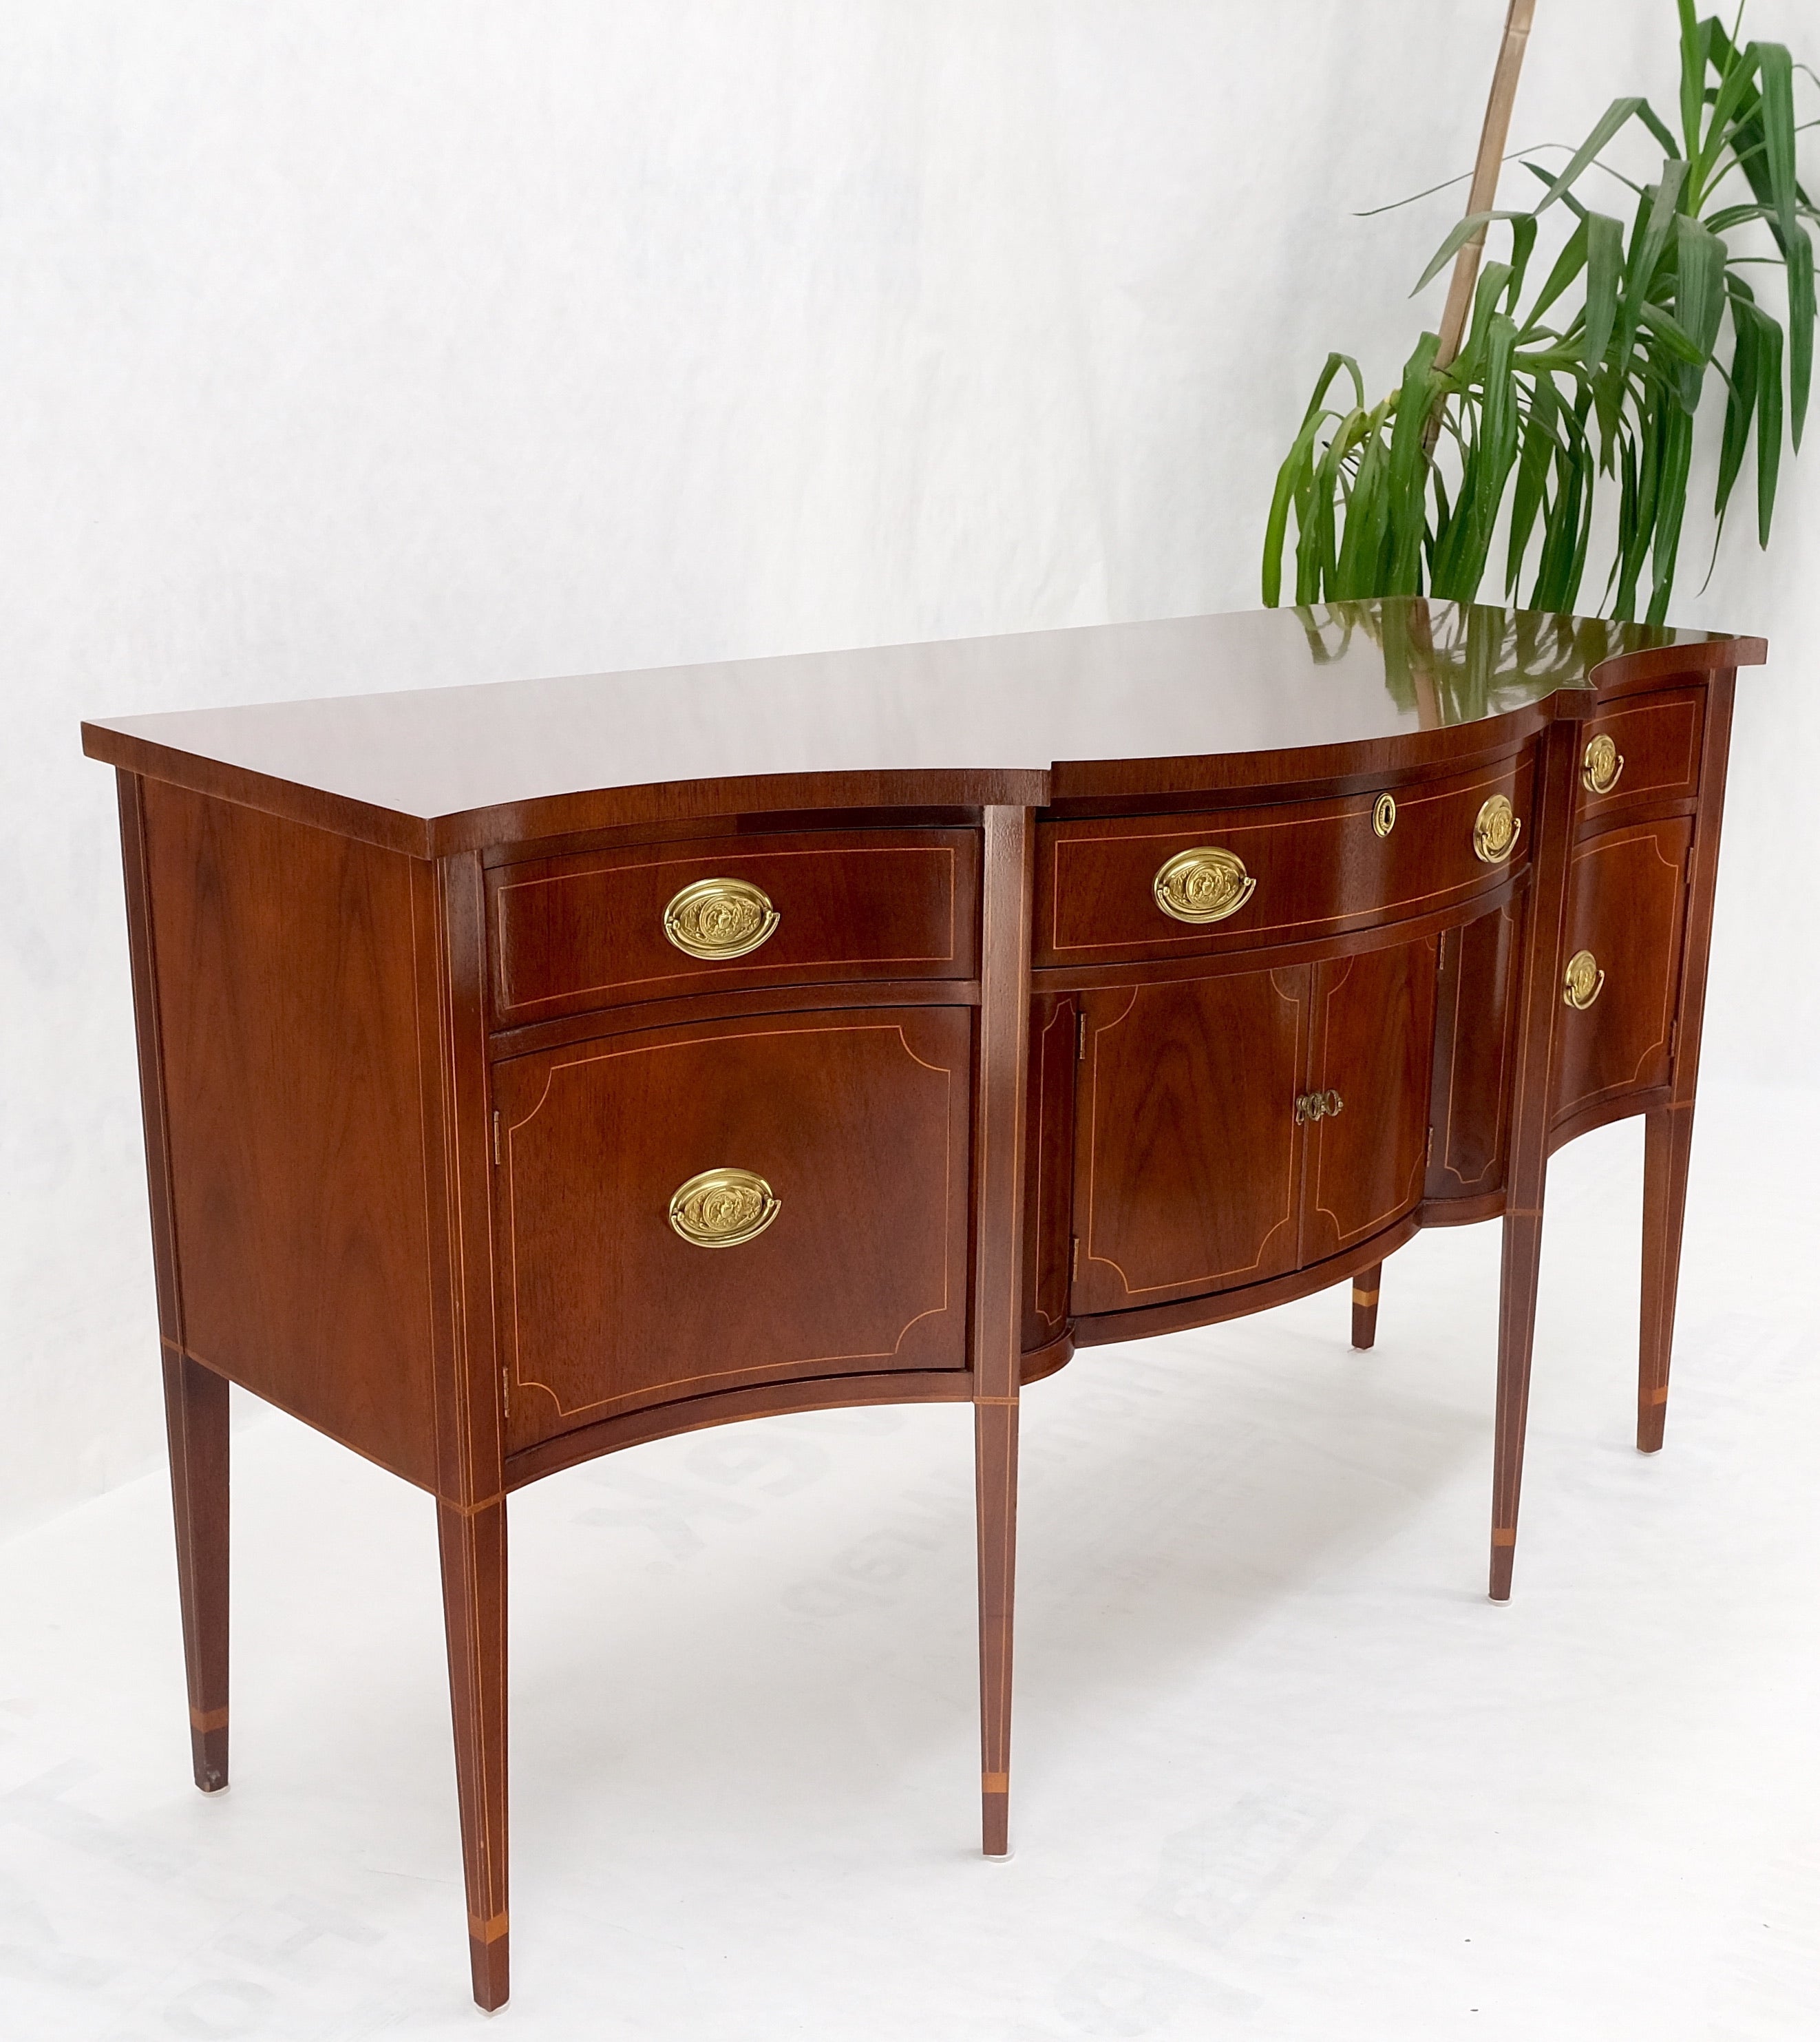 Lacquered Full Size Pencil Inlaid Mahogany Federal SideBoard Server Buffet by Baker MINT! For Sale